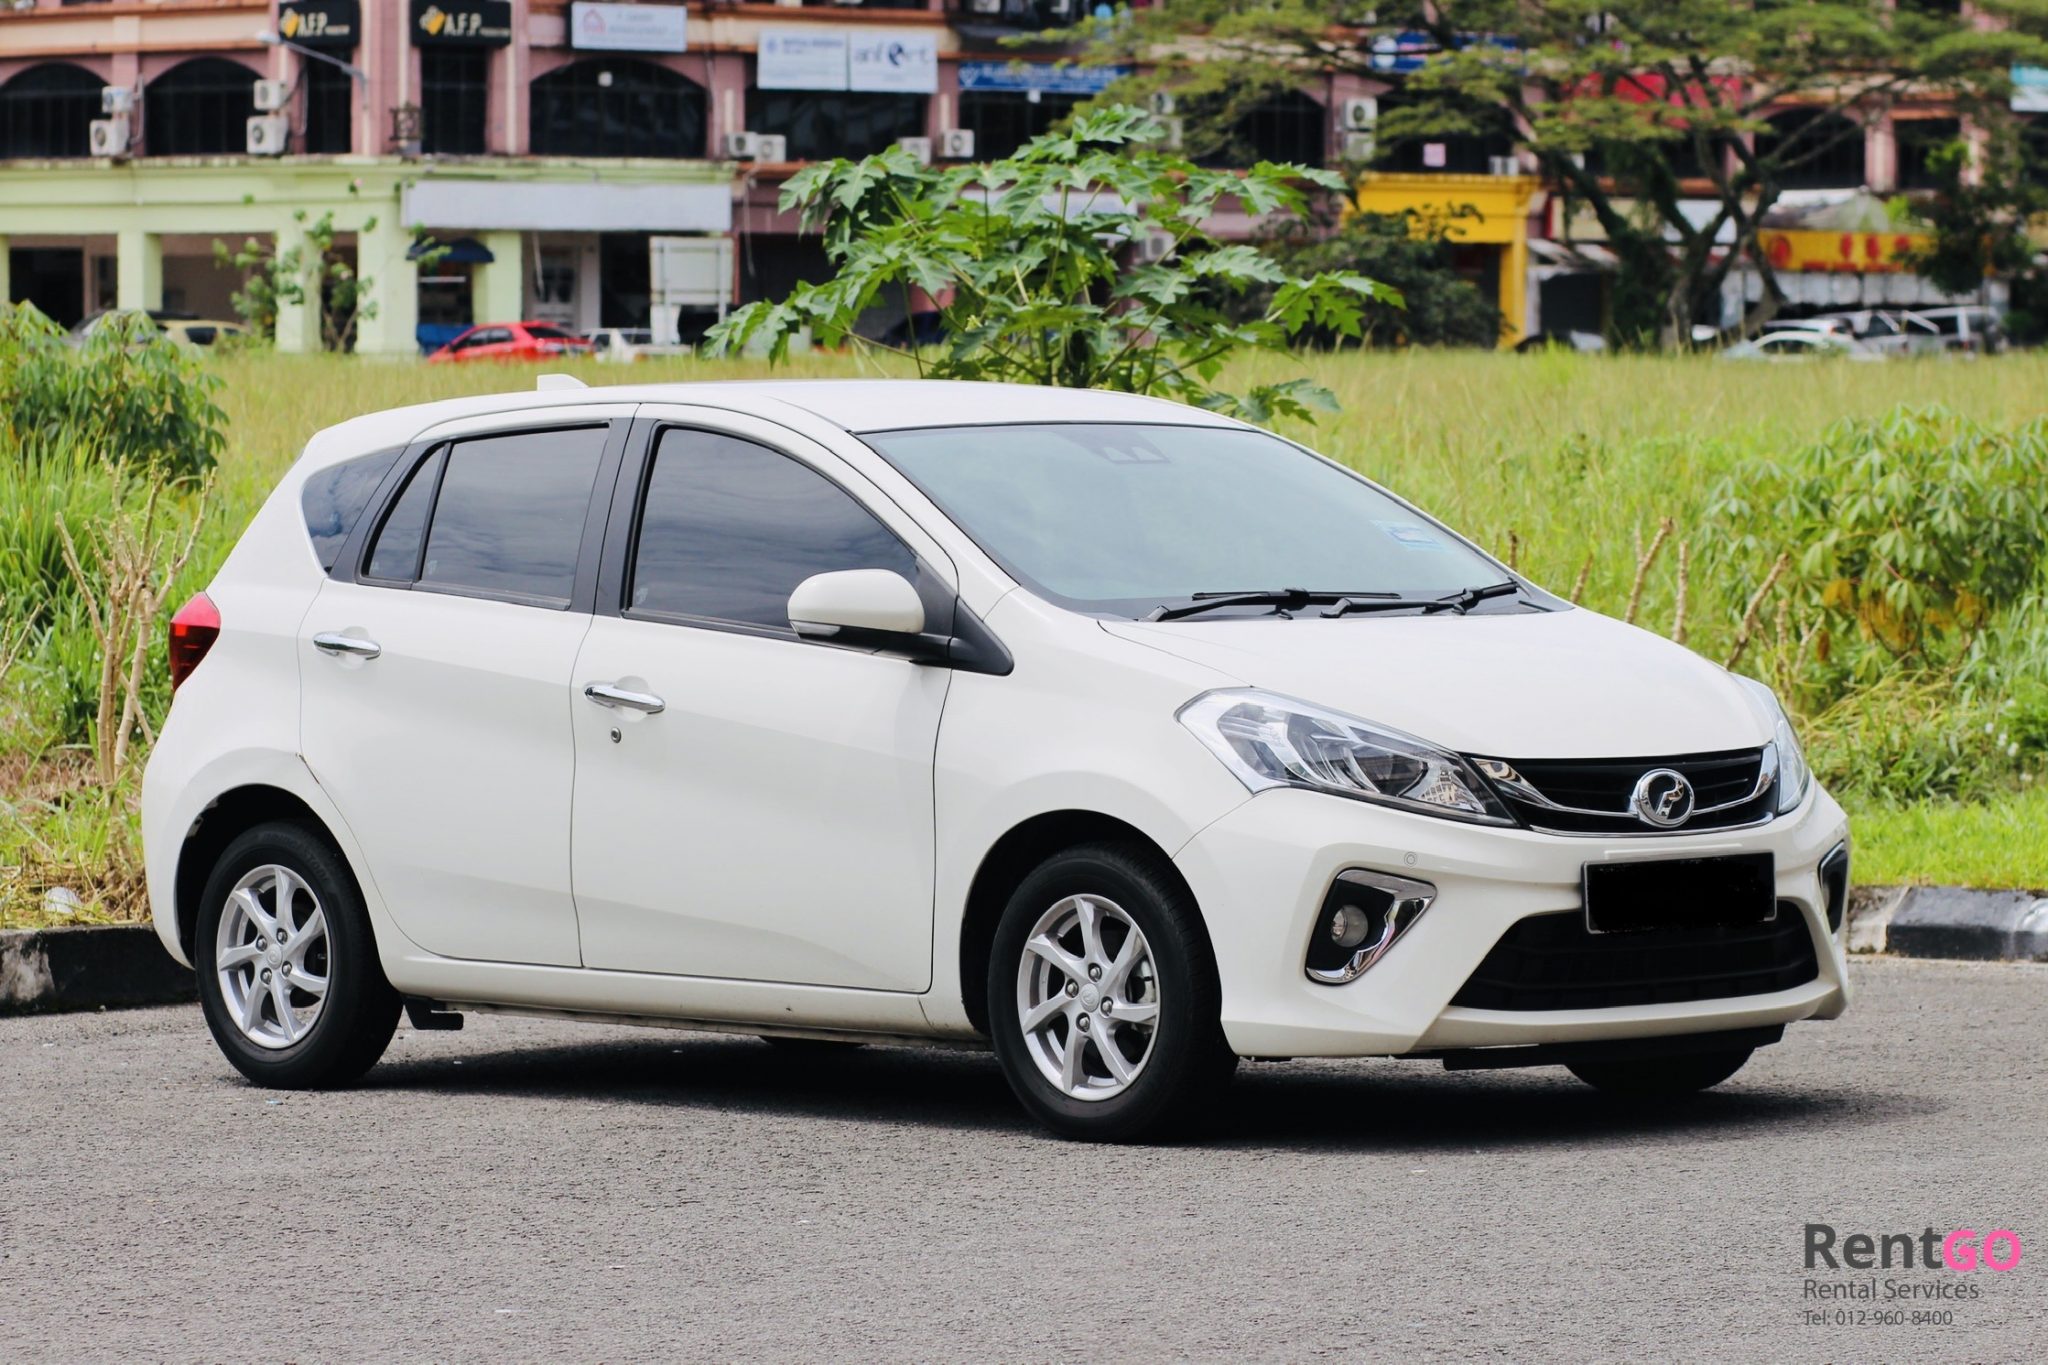 NEW Myvi For Rent in Kuching For Rm130!